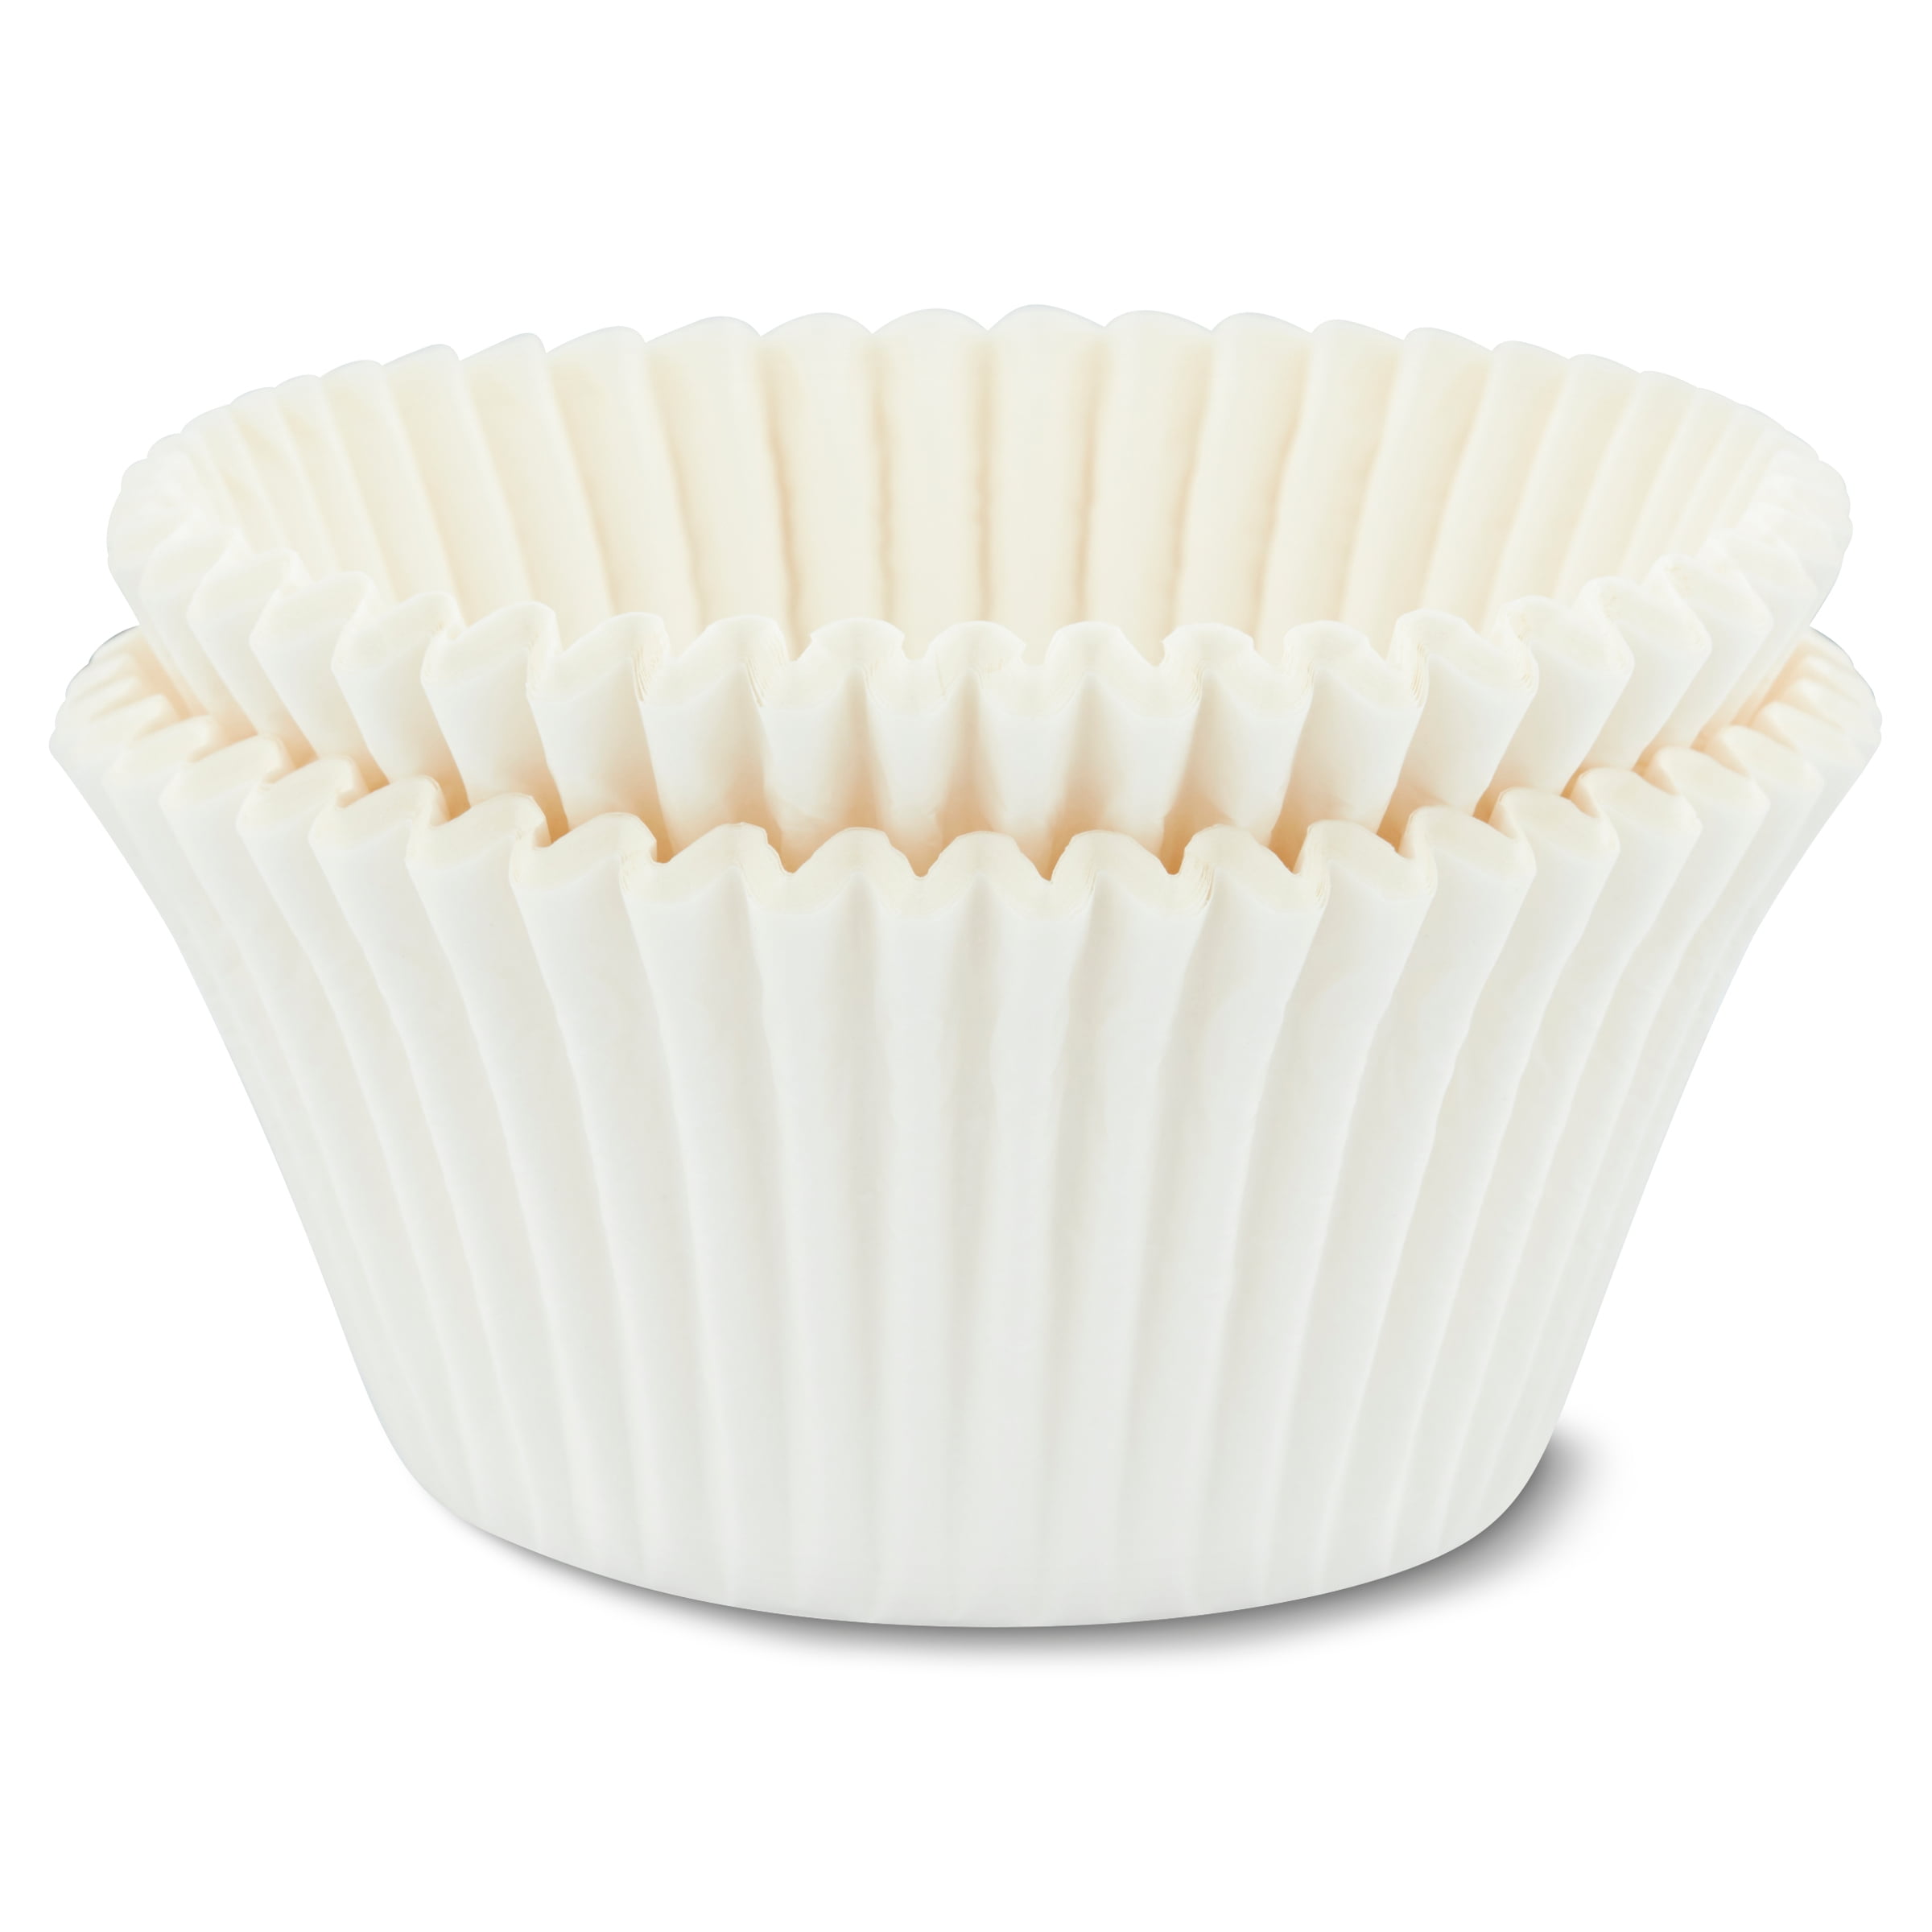 MyBakning Jumbo size Extra Large White Brown Natural Cupcake Baking Cups  2-3/4(Bottom) x2(Deep) paper muffin liners, 120 pcs per case